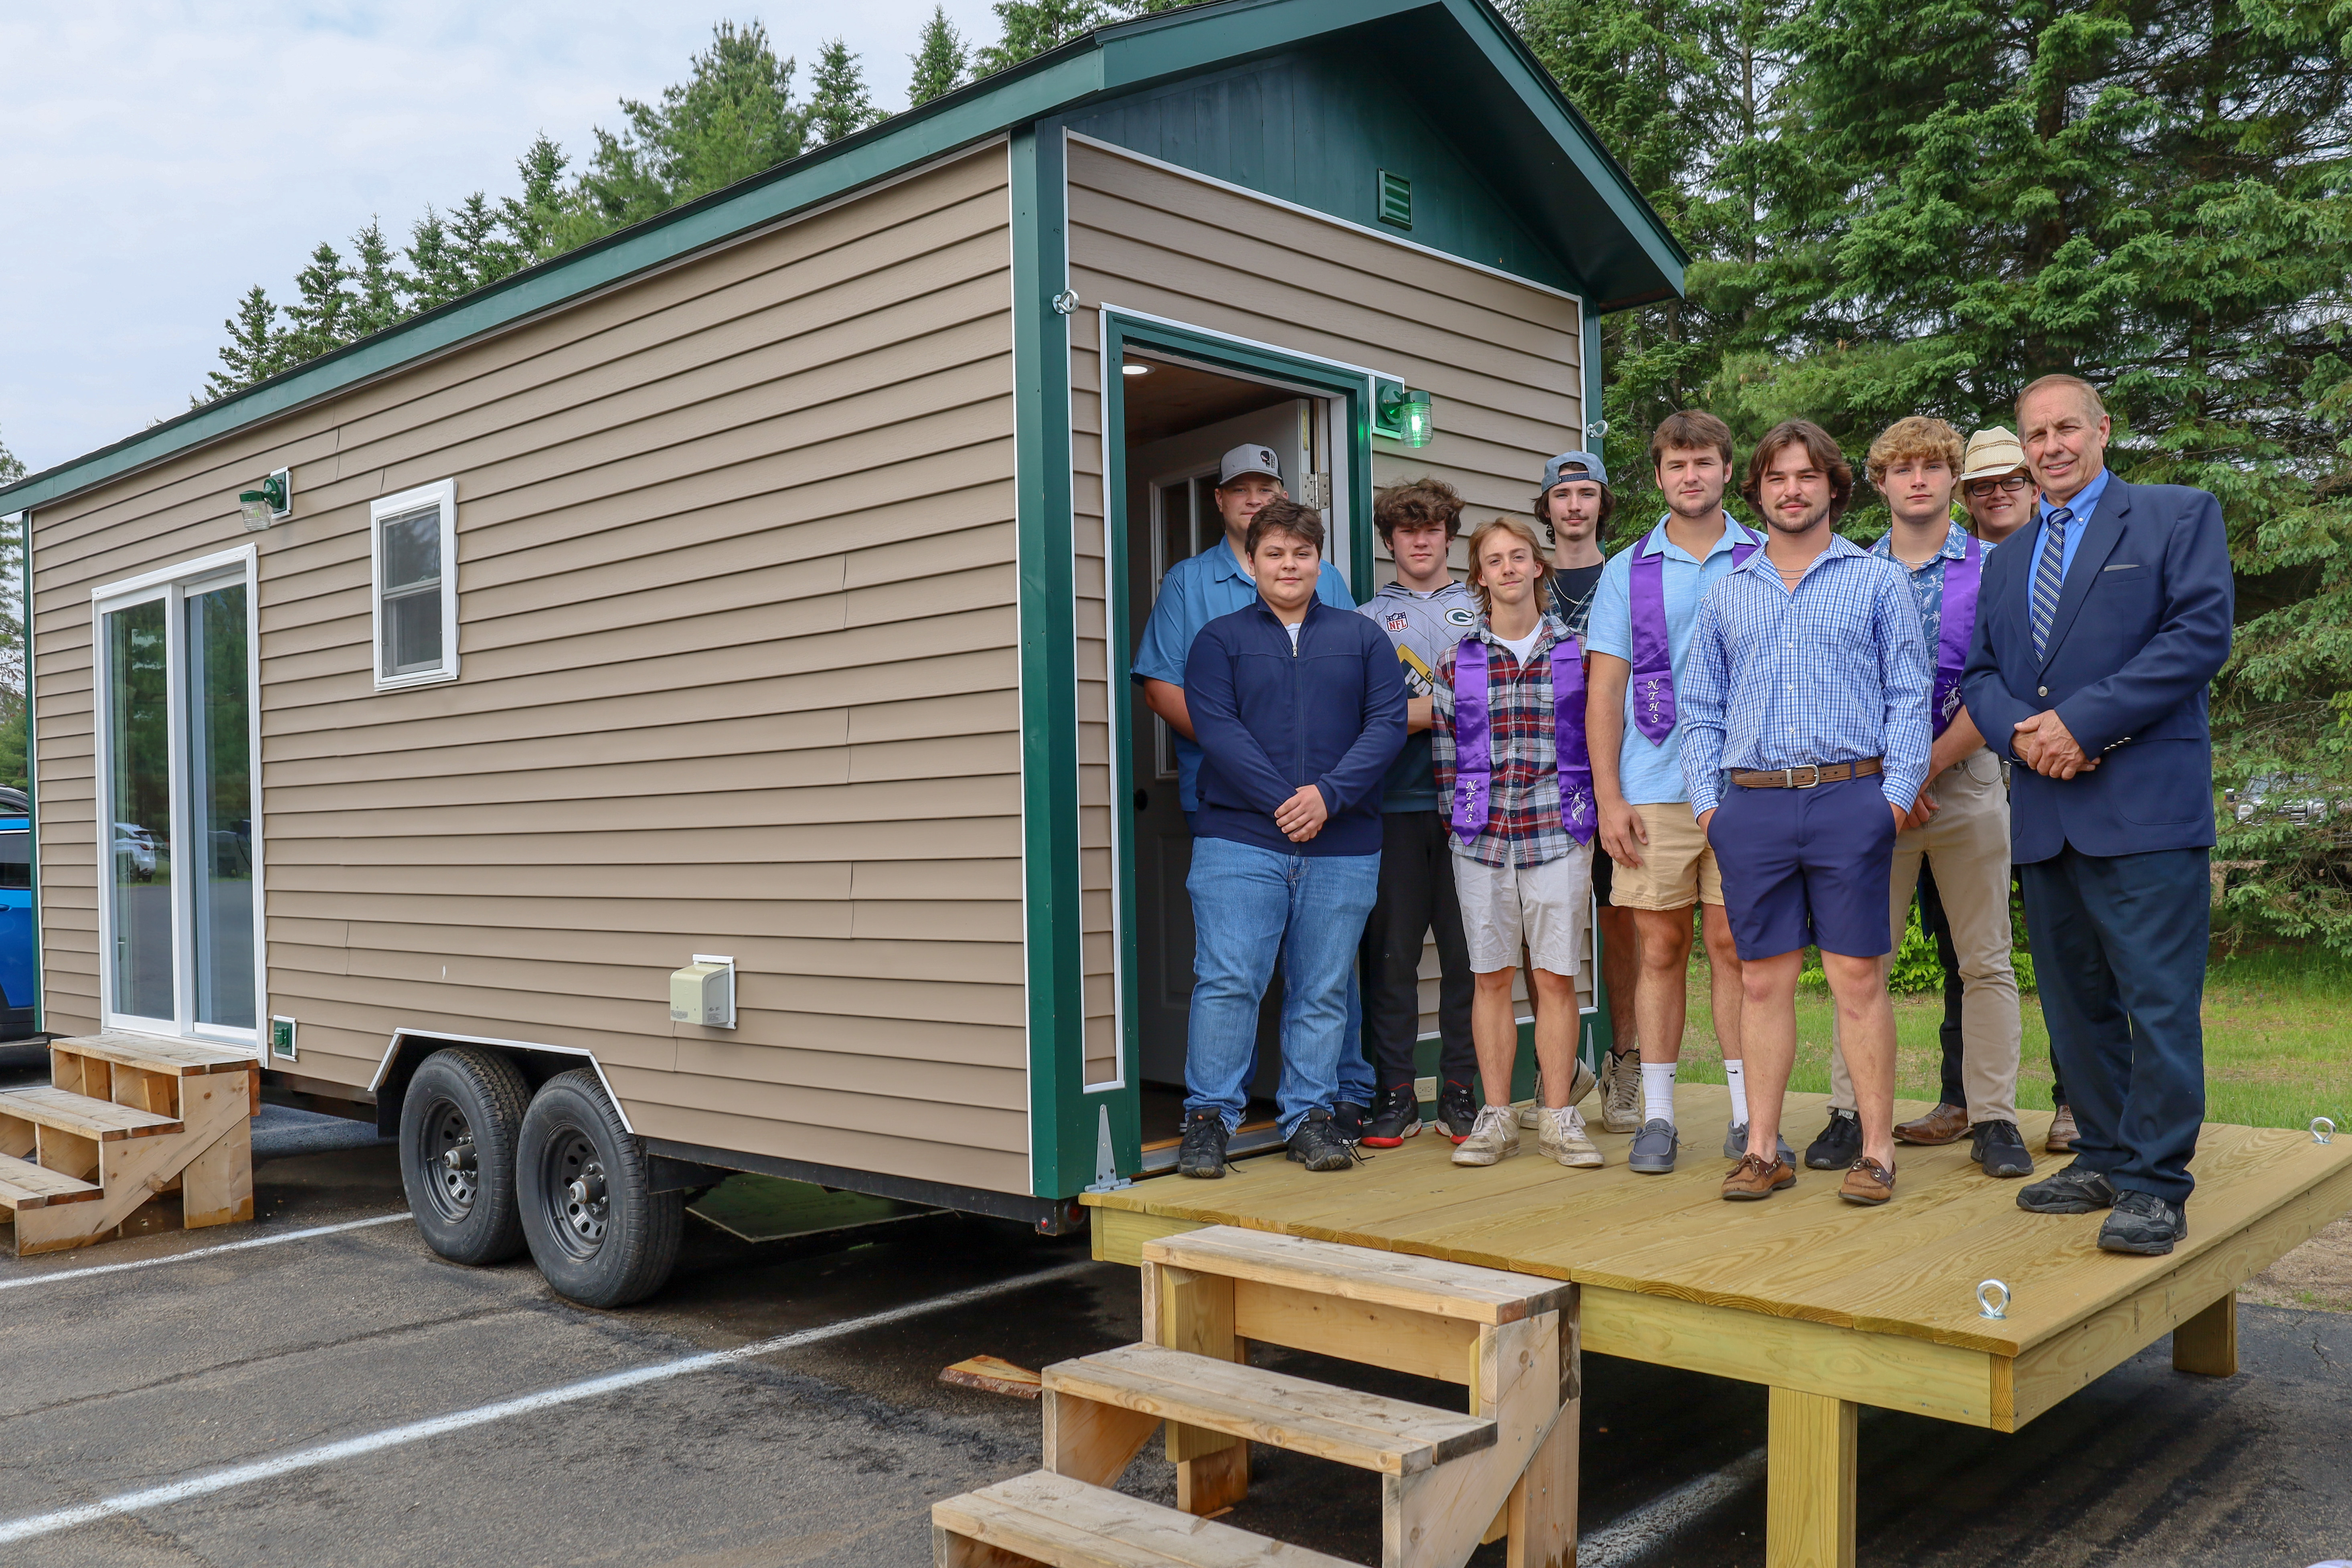 A group of people poses on the porch of a tiny house